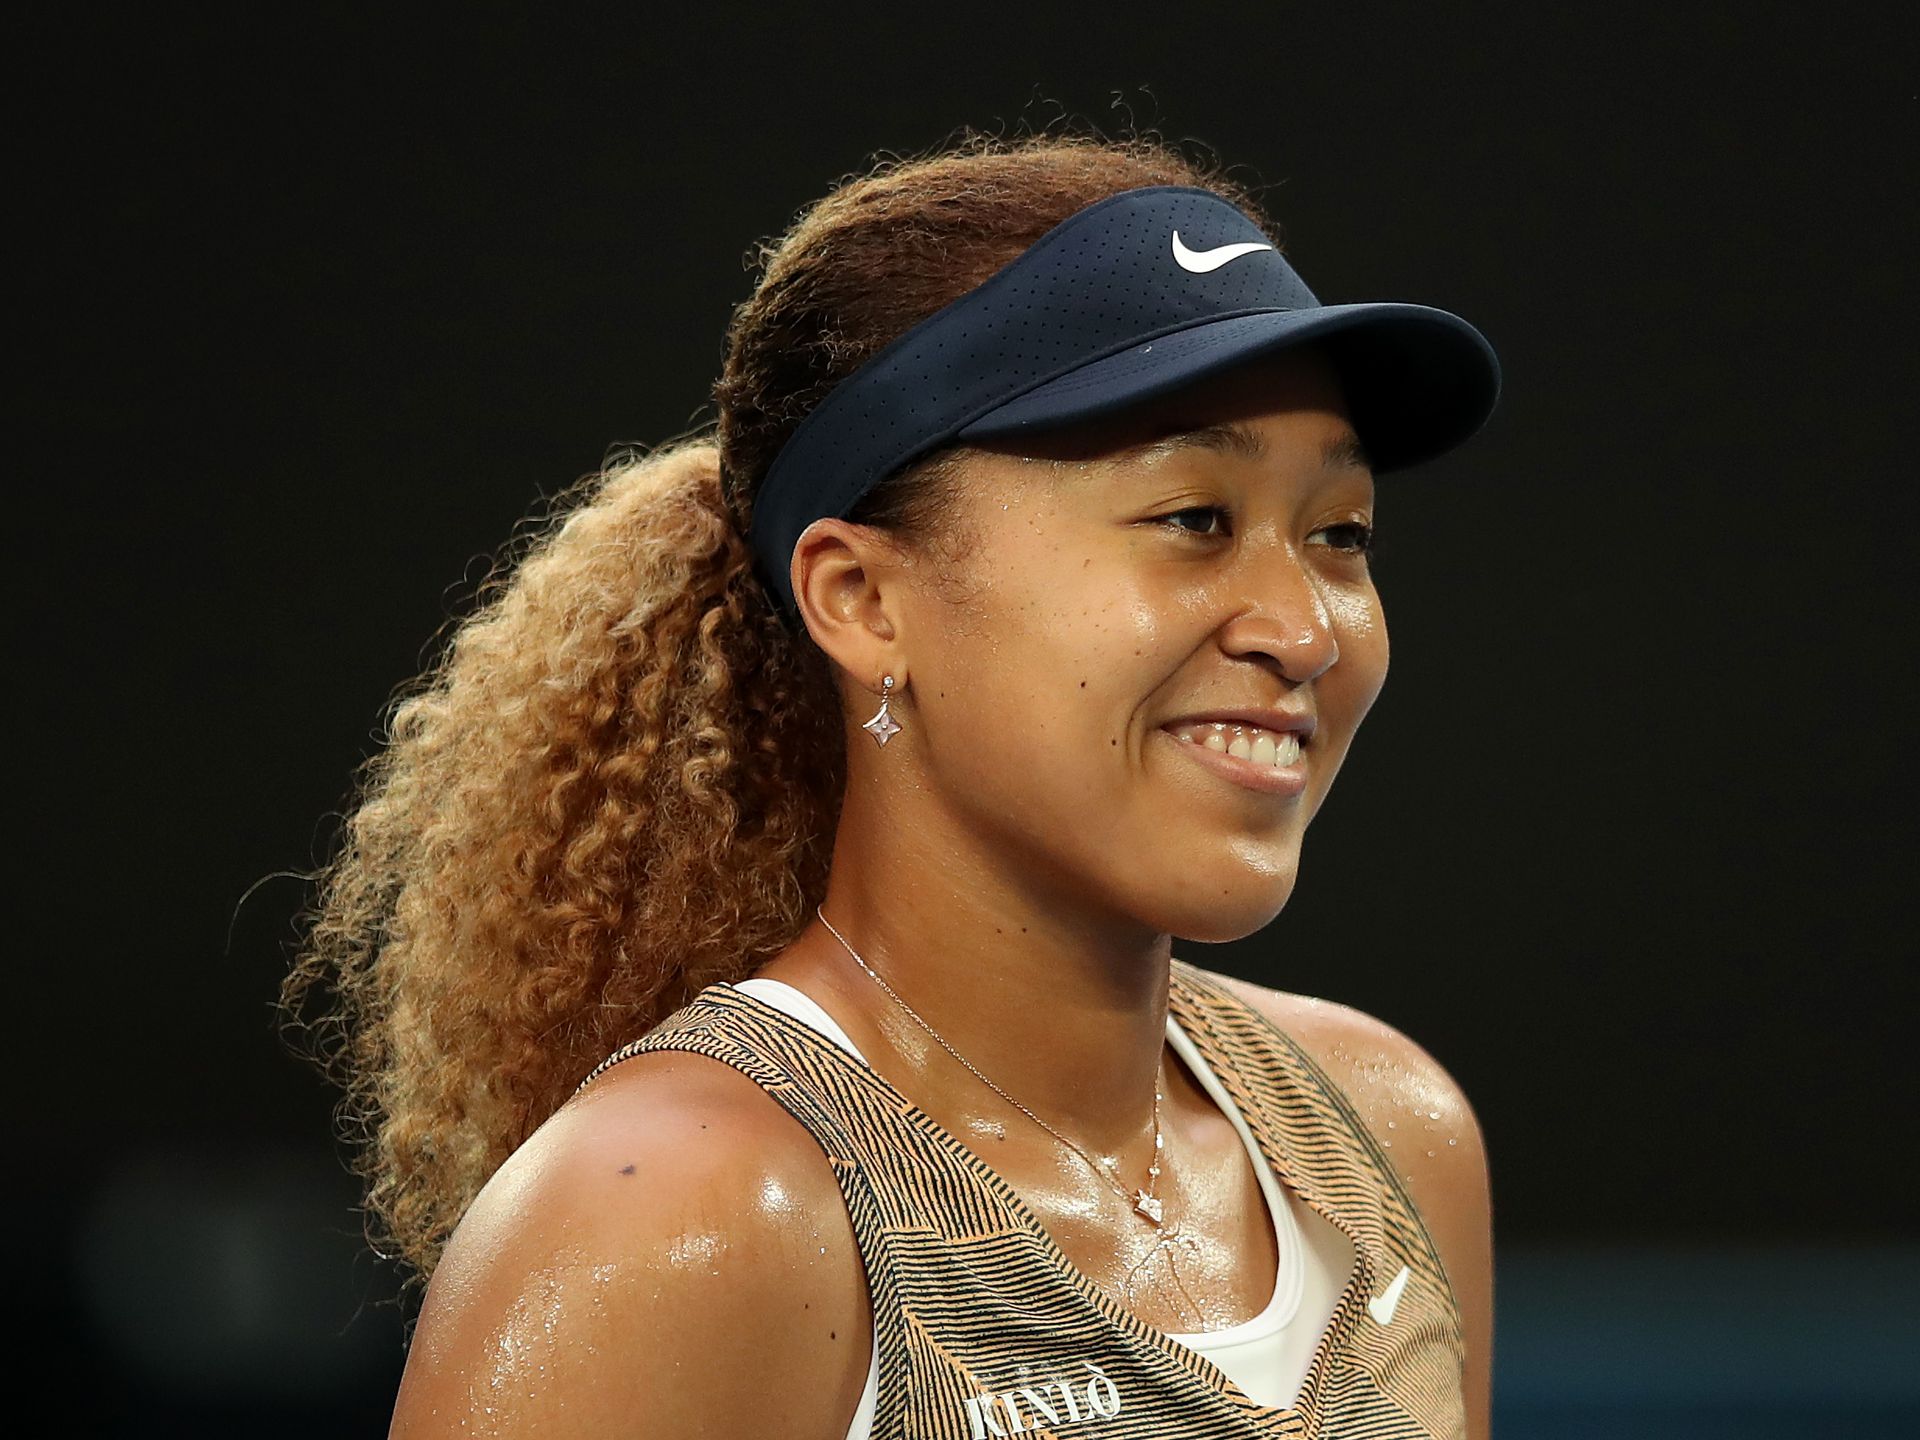 Rapper Cordae Reveals Name of Baby with Naomi Osaka